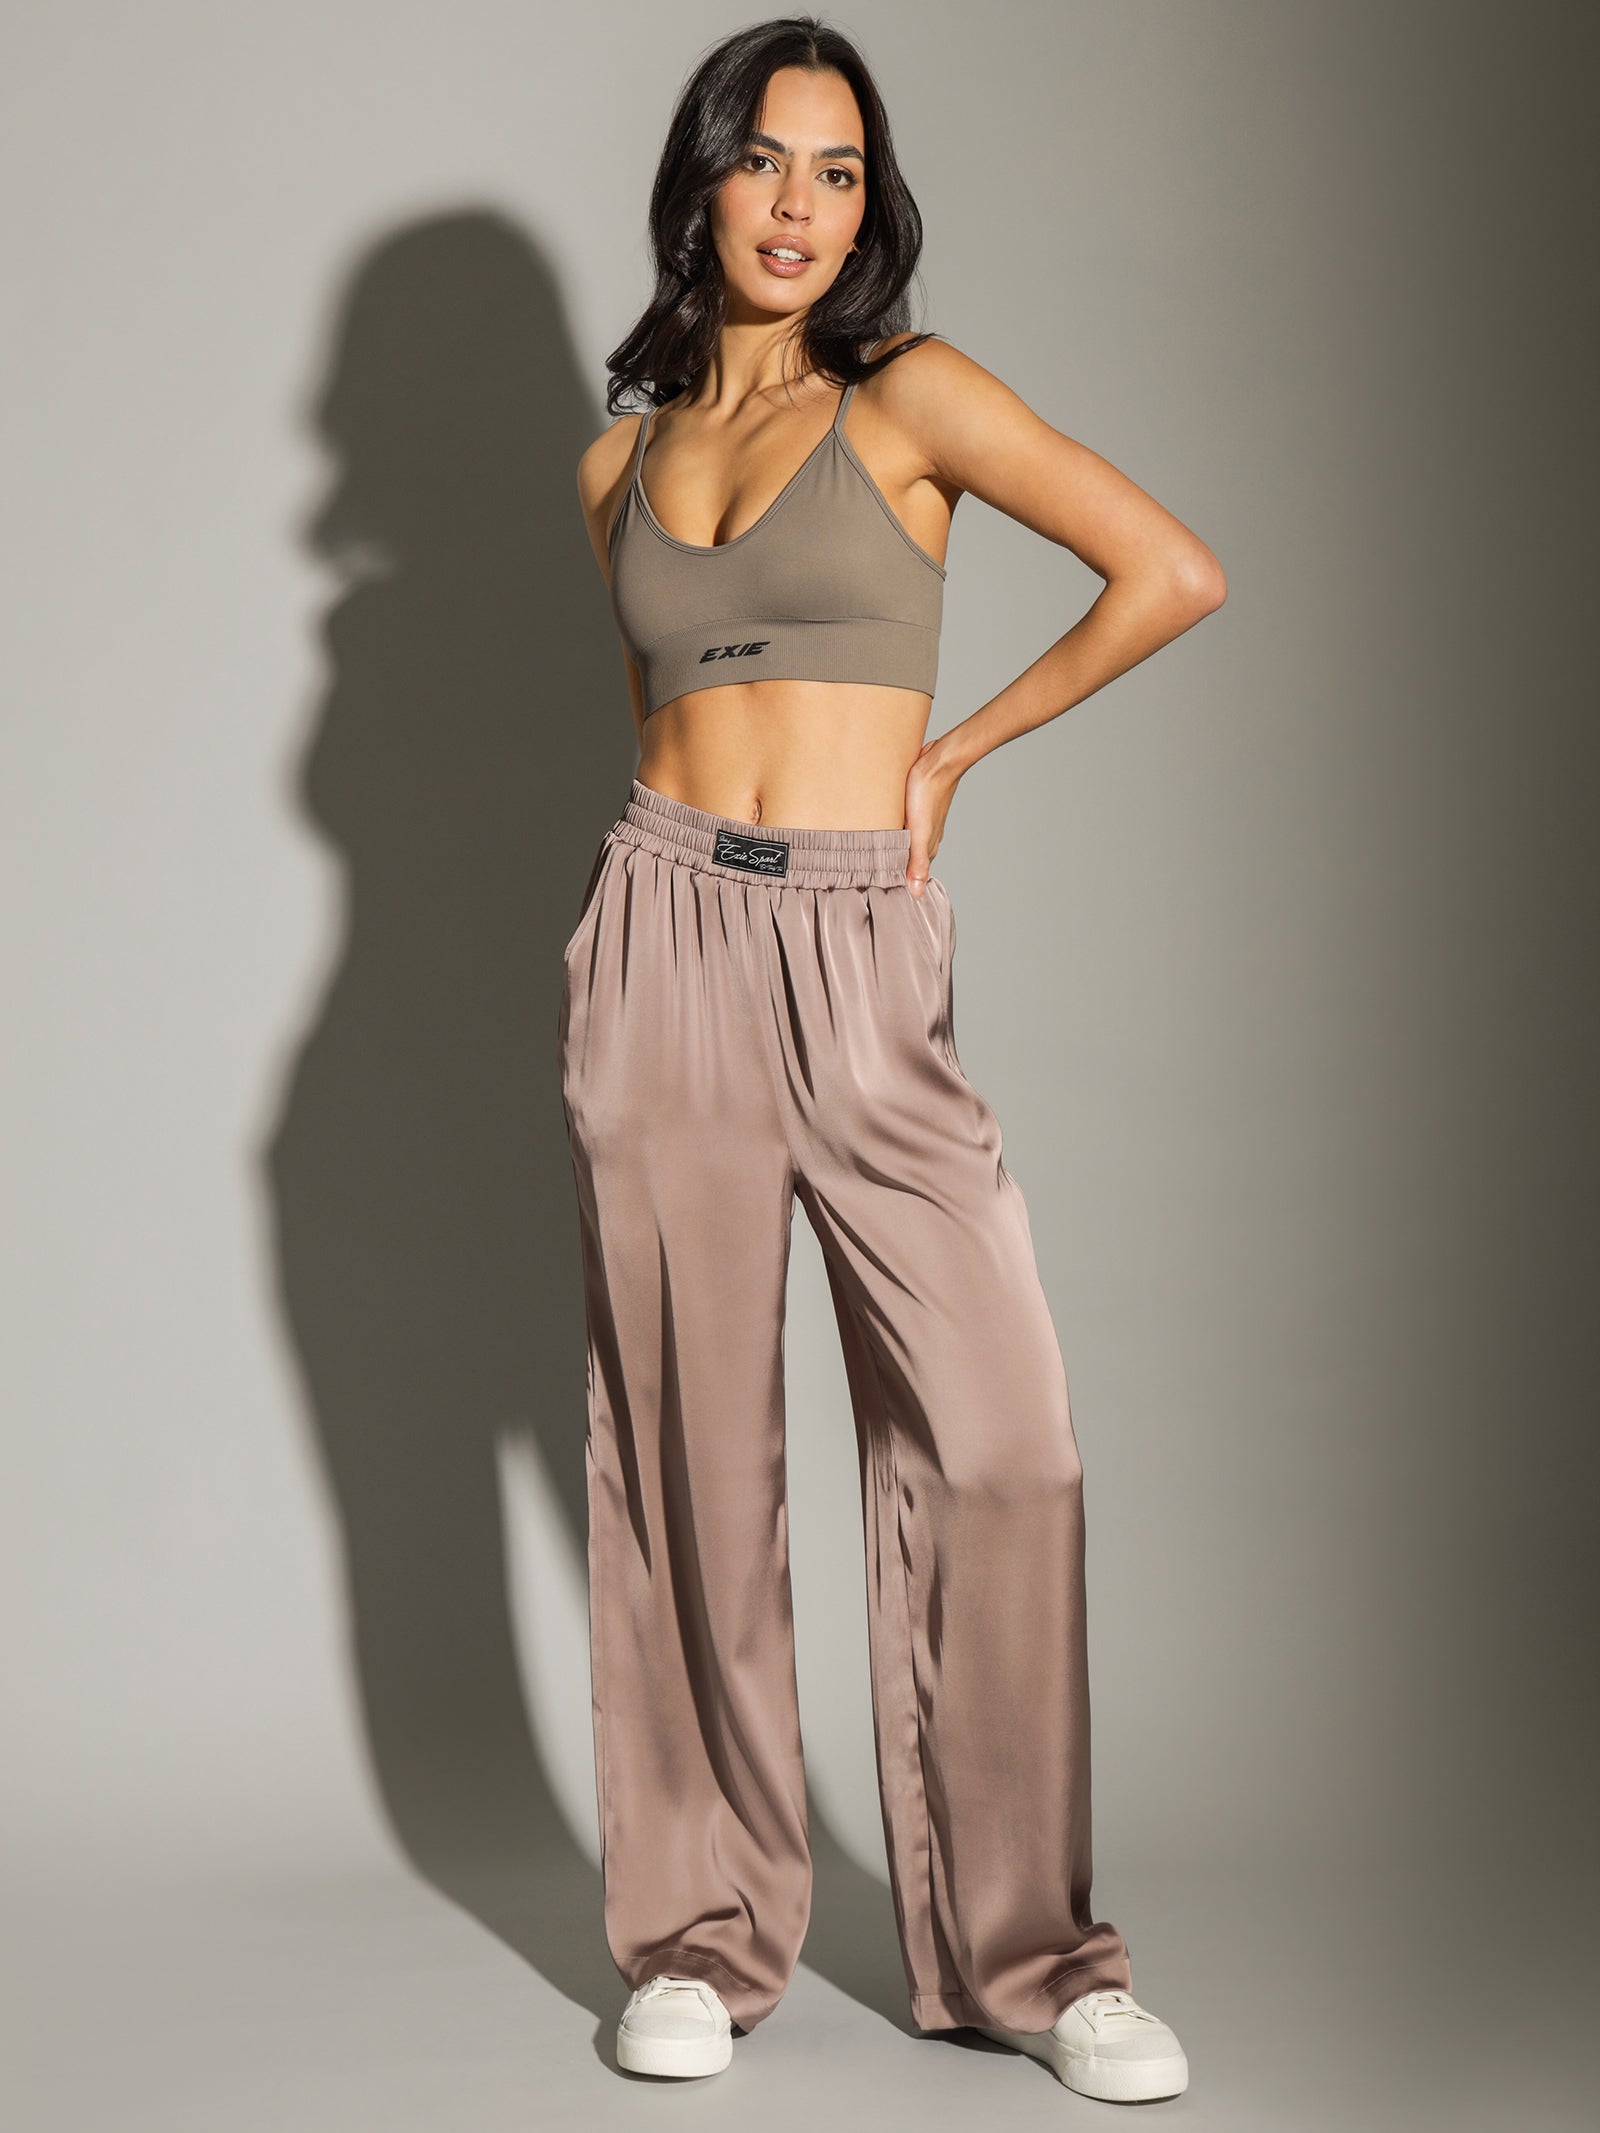 Flow Pants in Taupe